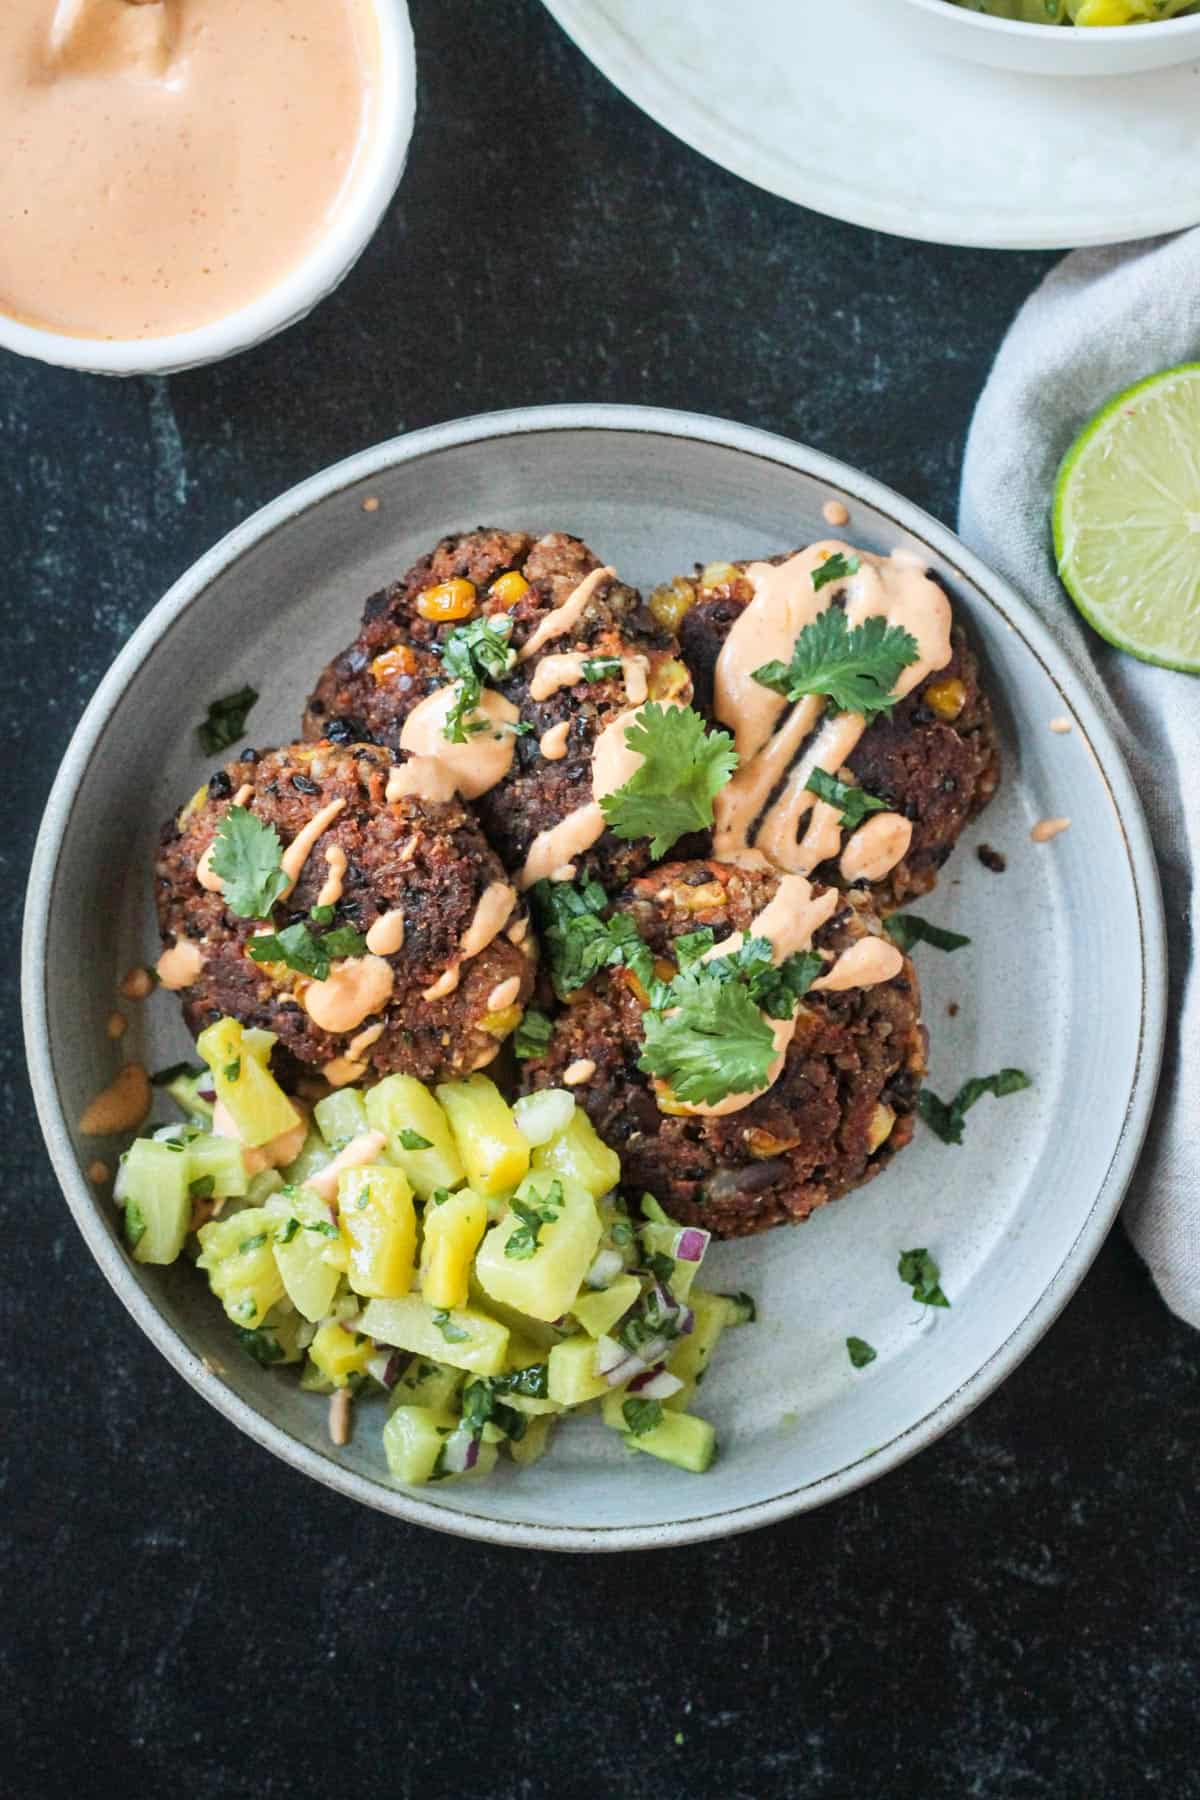 Four black bean patties on a plate with pineapple avocado salsa and chipotle crema.